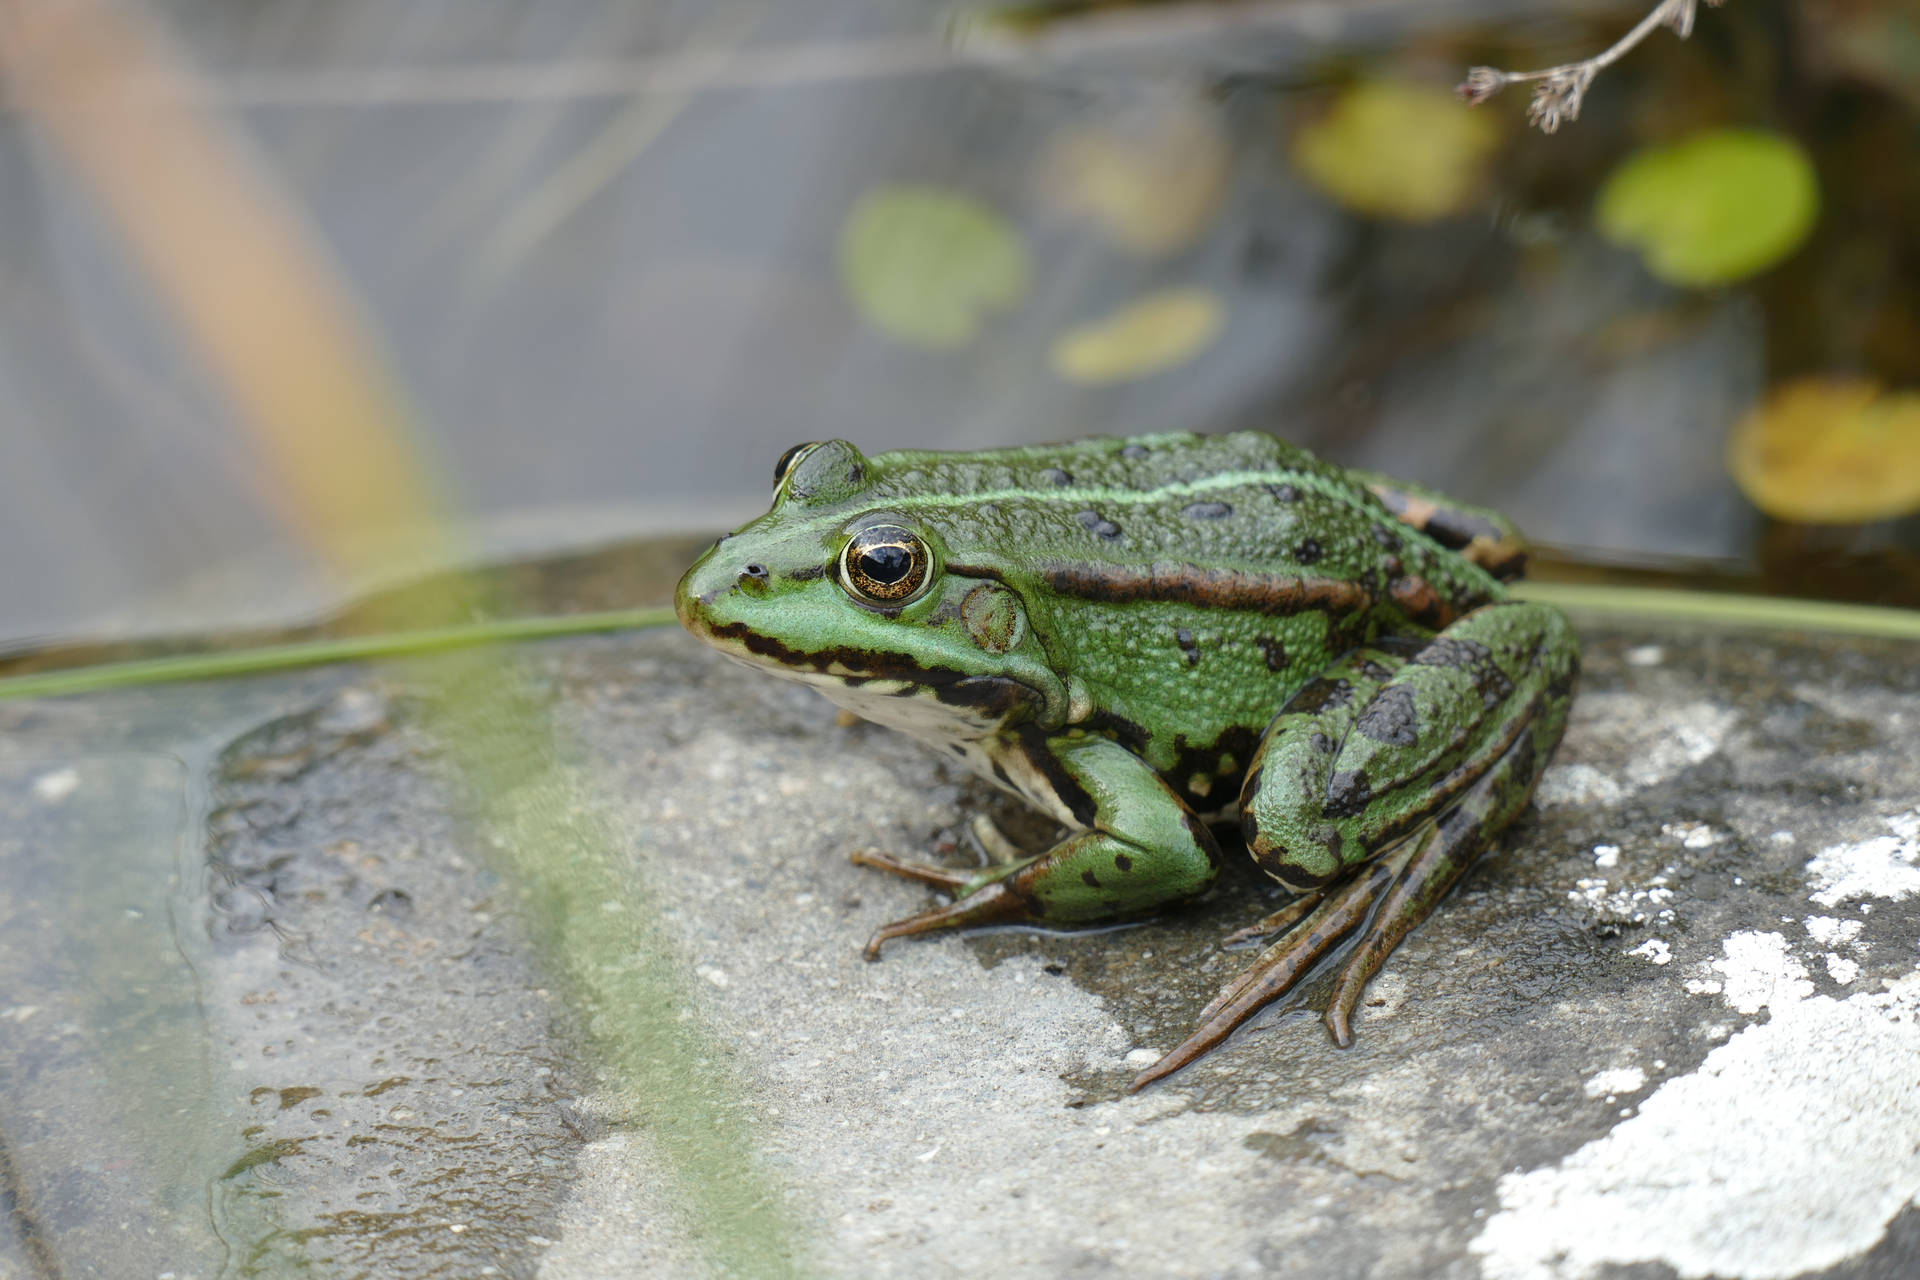 Frog 5472X3648 Wallpaper and Background Image